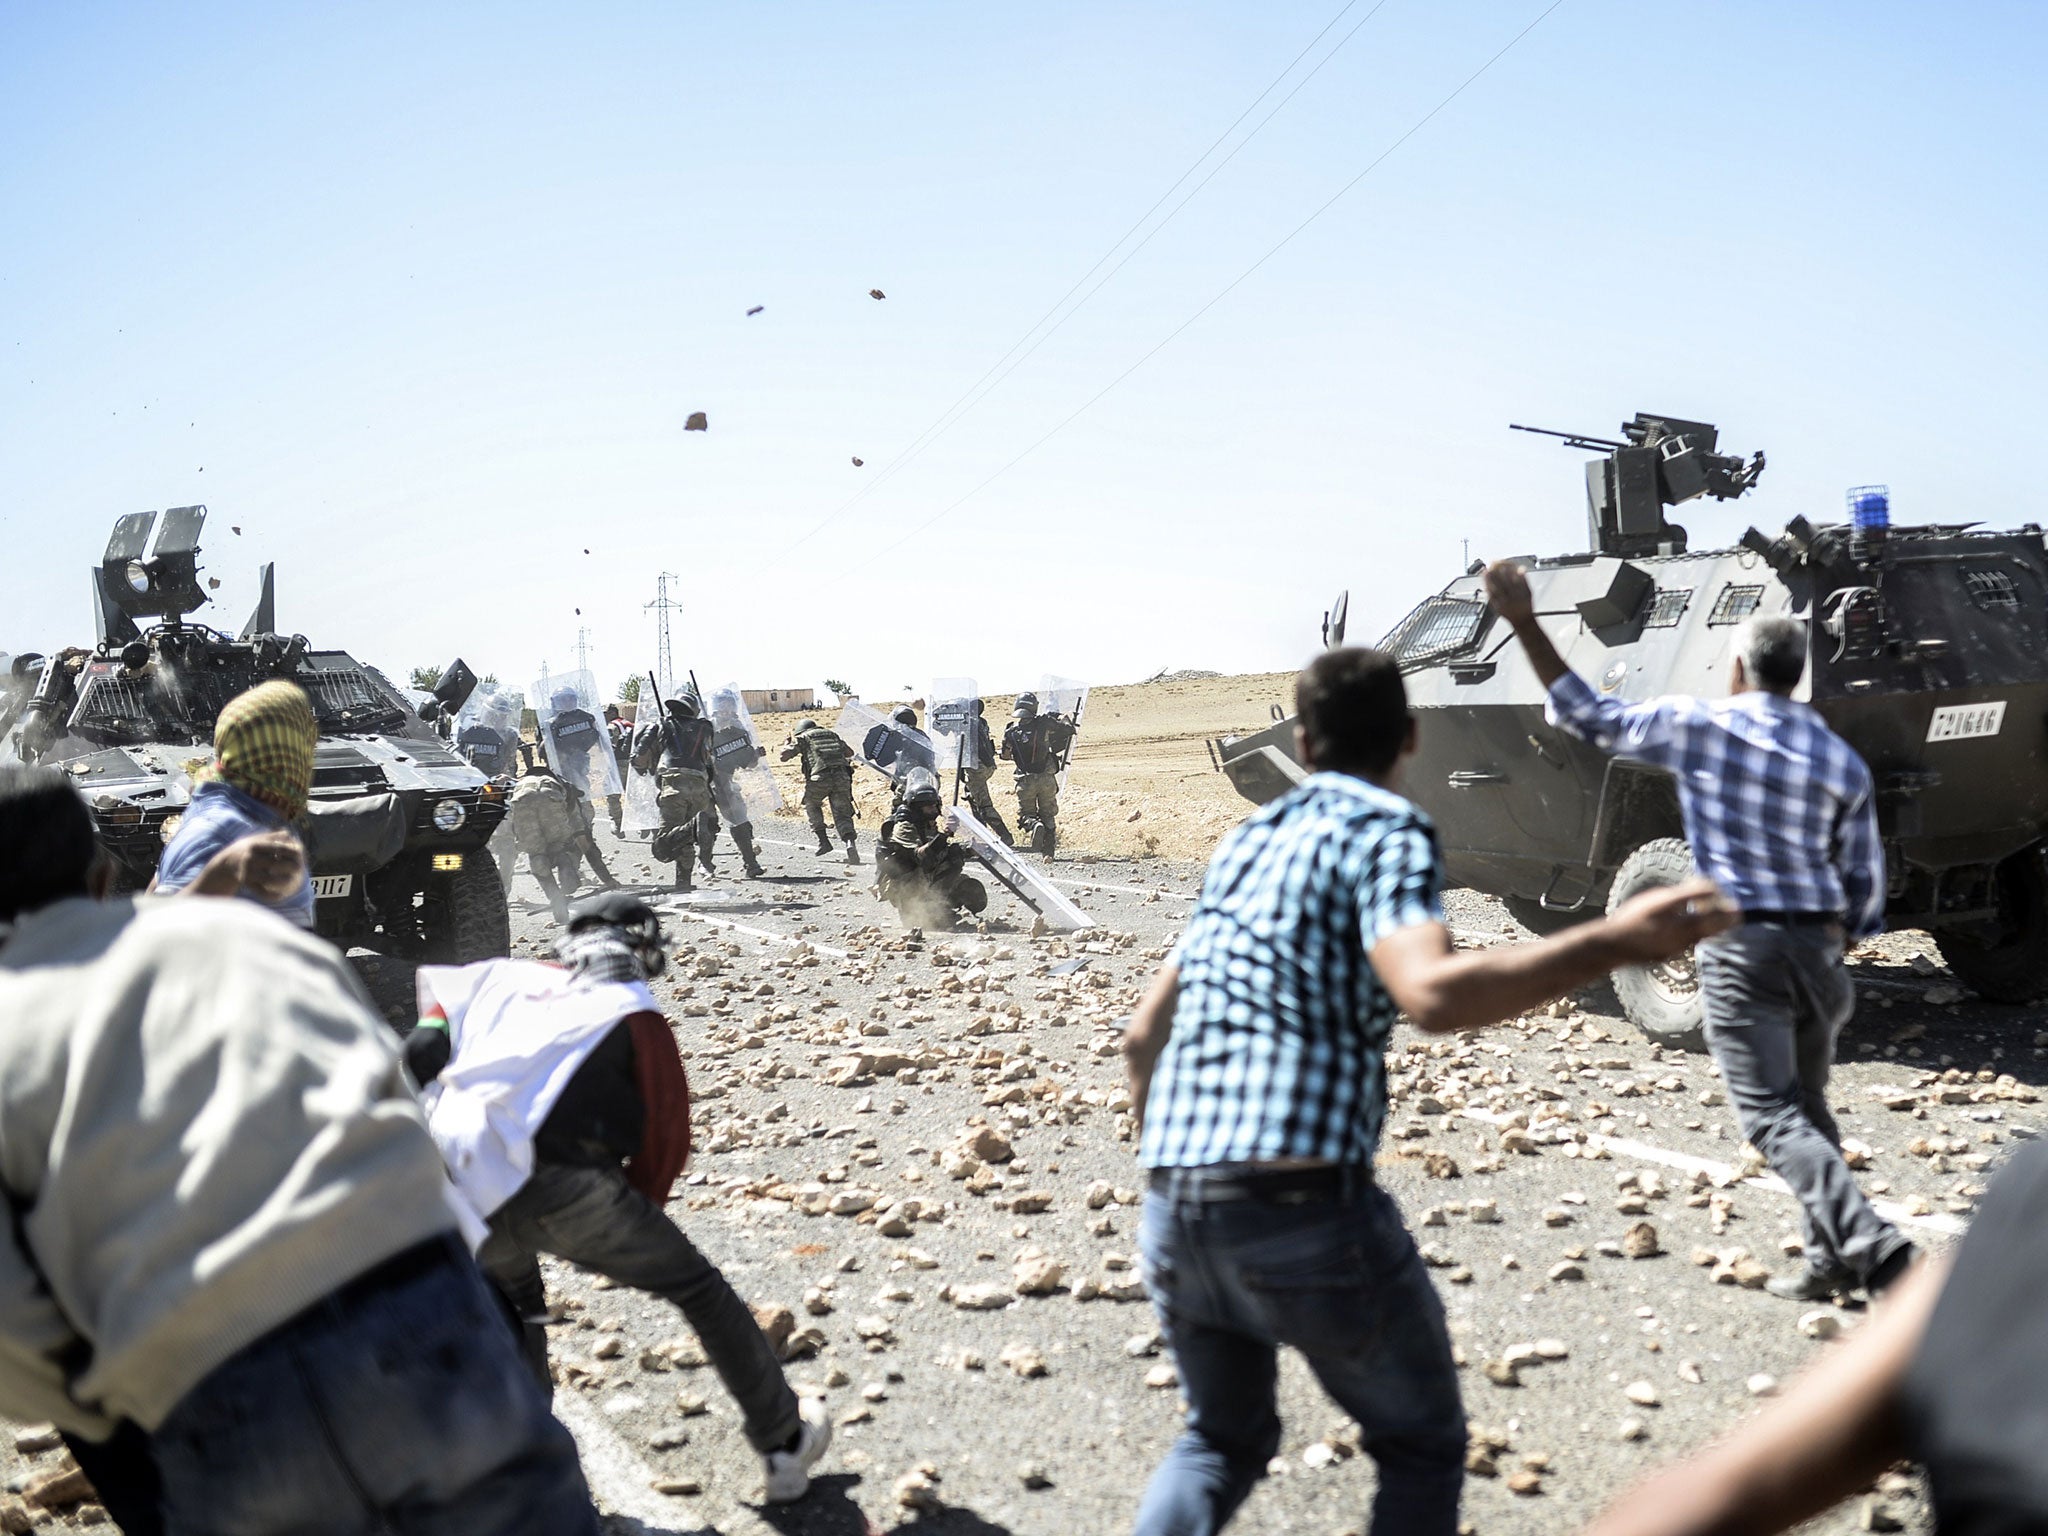 Kurdish refugees clash with Turkish soldiers near the Syrian border after Ankara temporarily closed the Suruc crossing